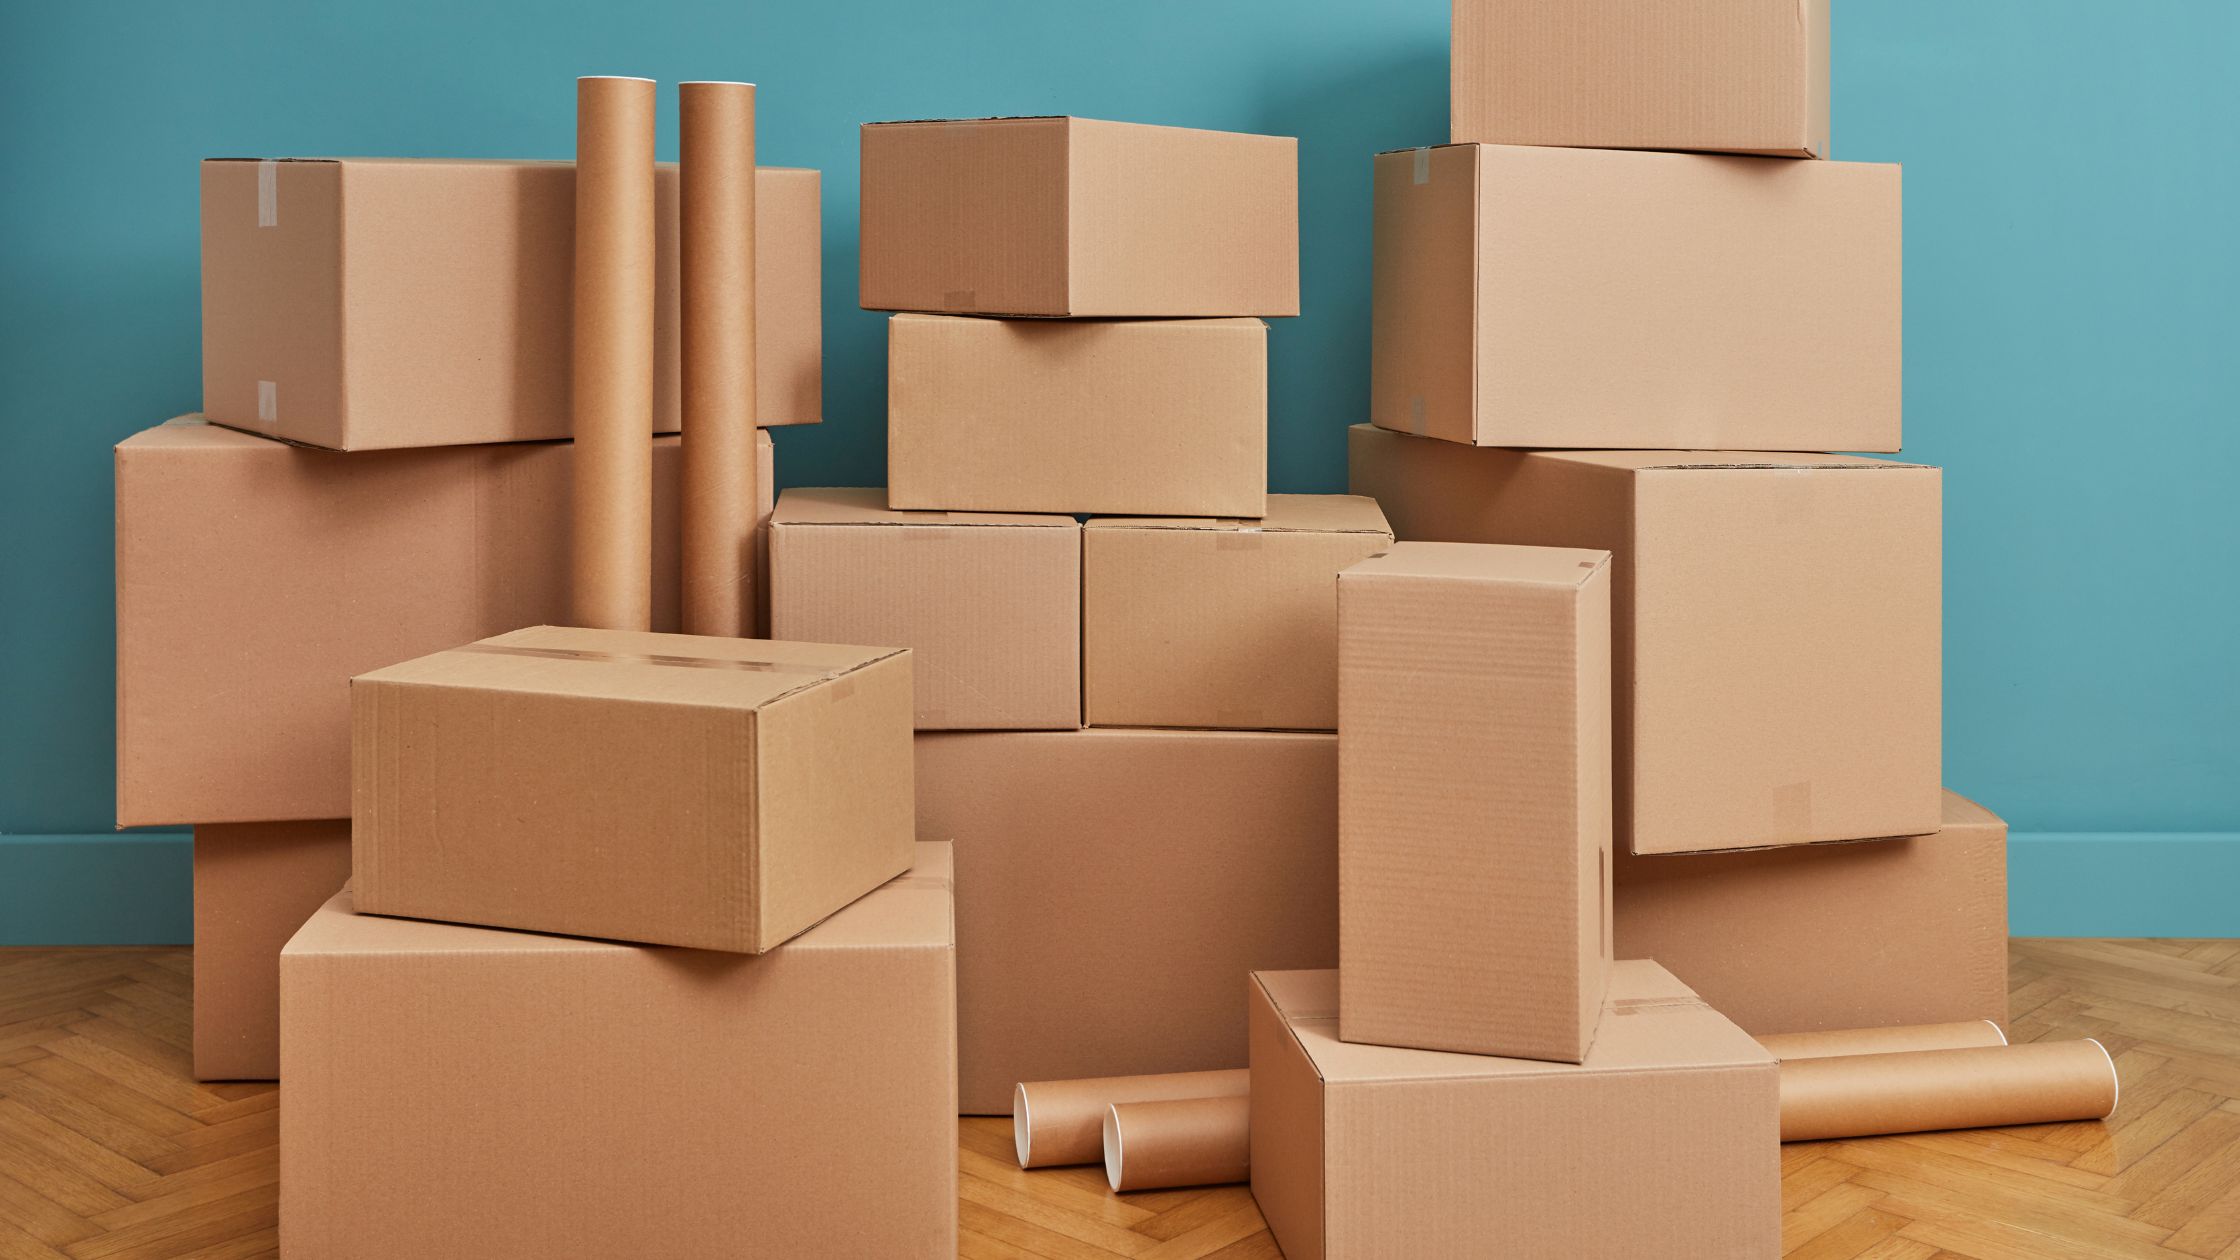 What can cardboard boxes be recycled into?